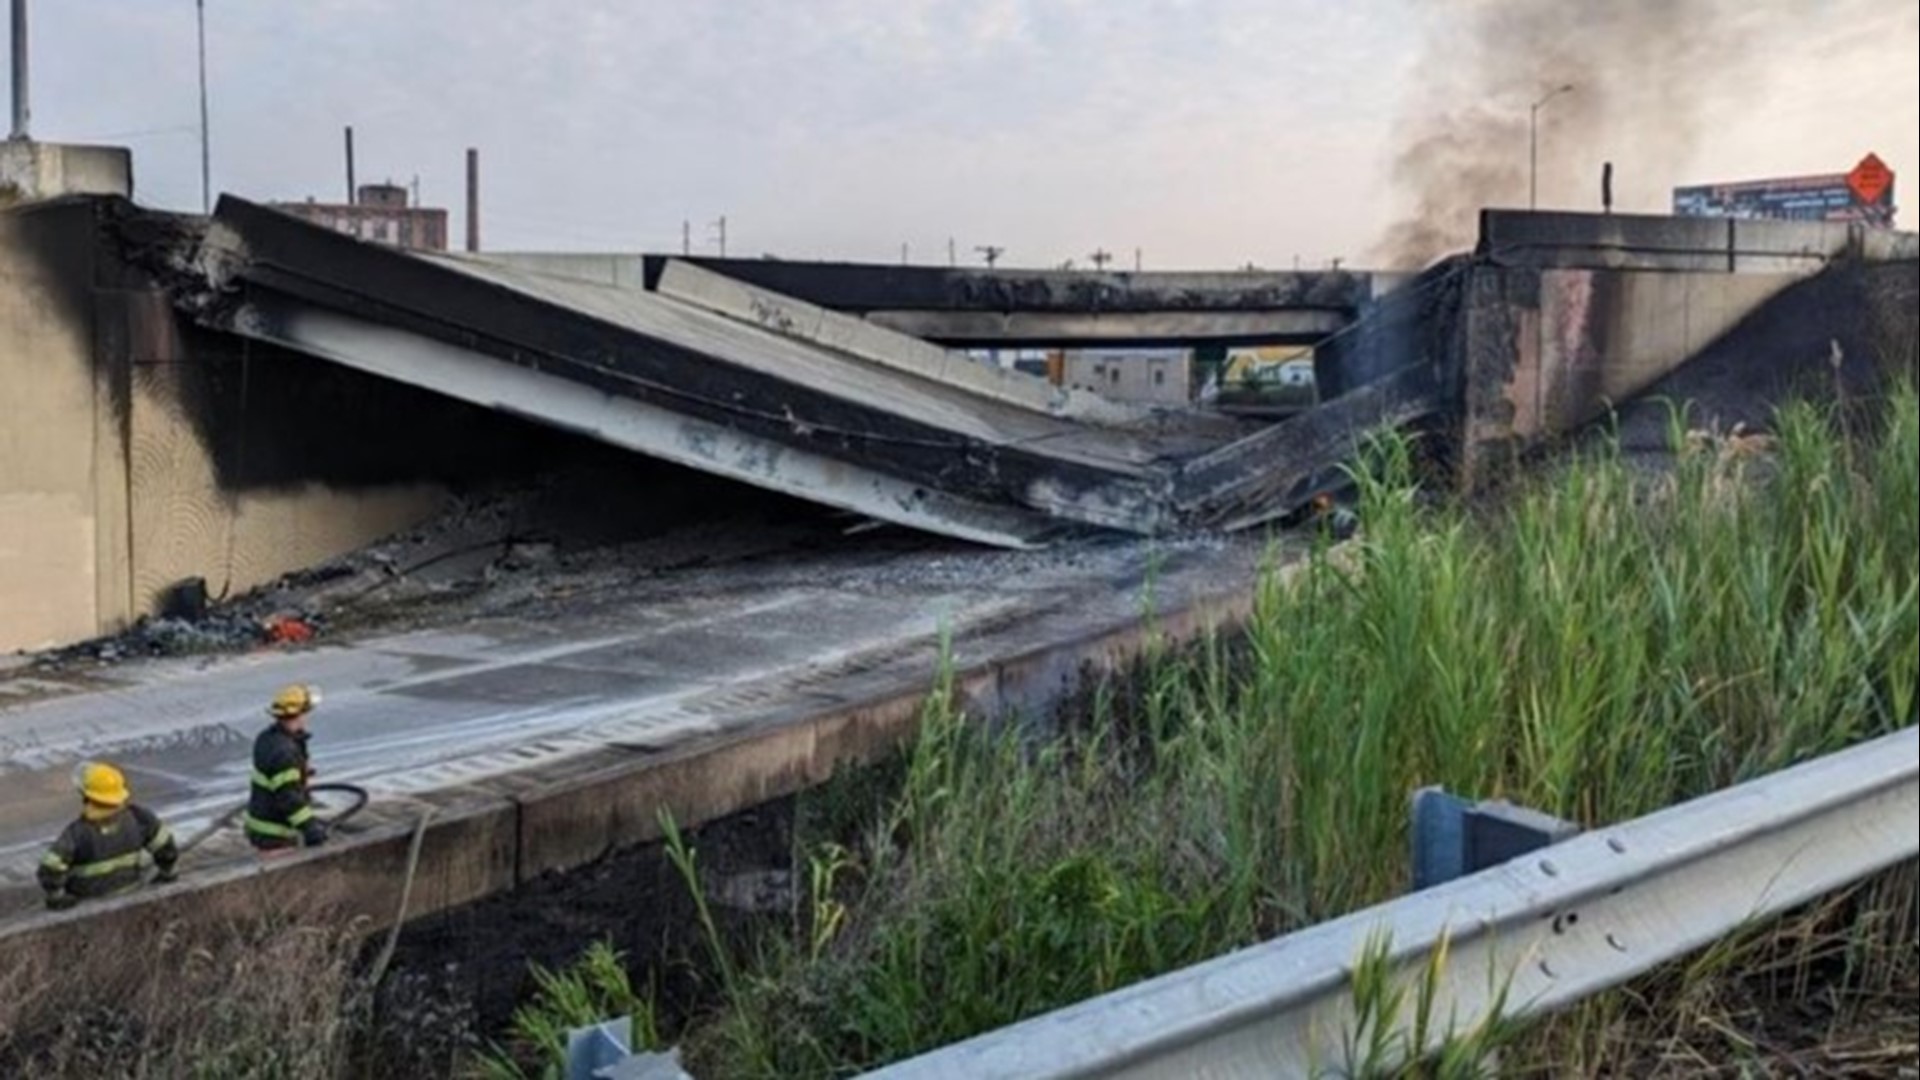 Philadelphia fire officials said the northbound side of I-95 collapsed, and the southbound lanes were “compromised” due to heat from the fire.